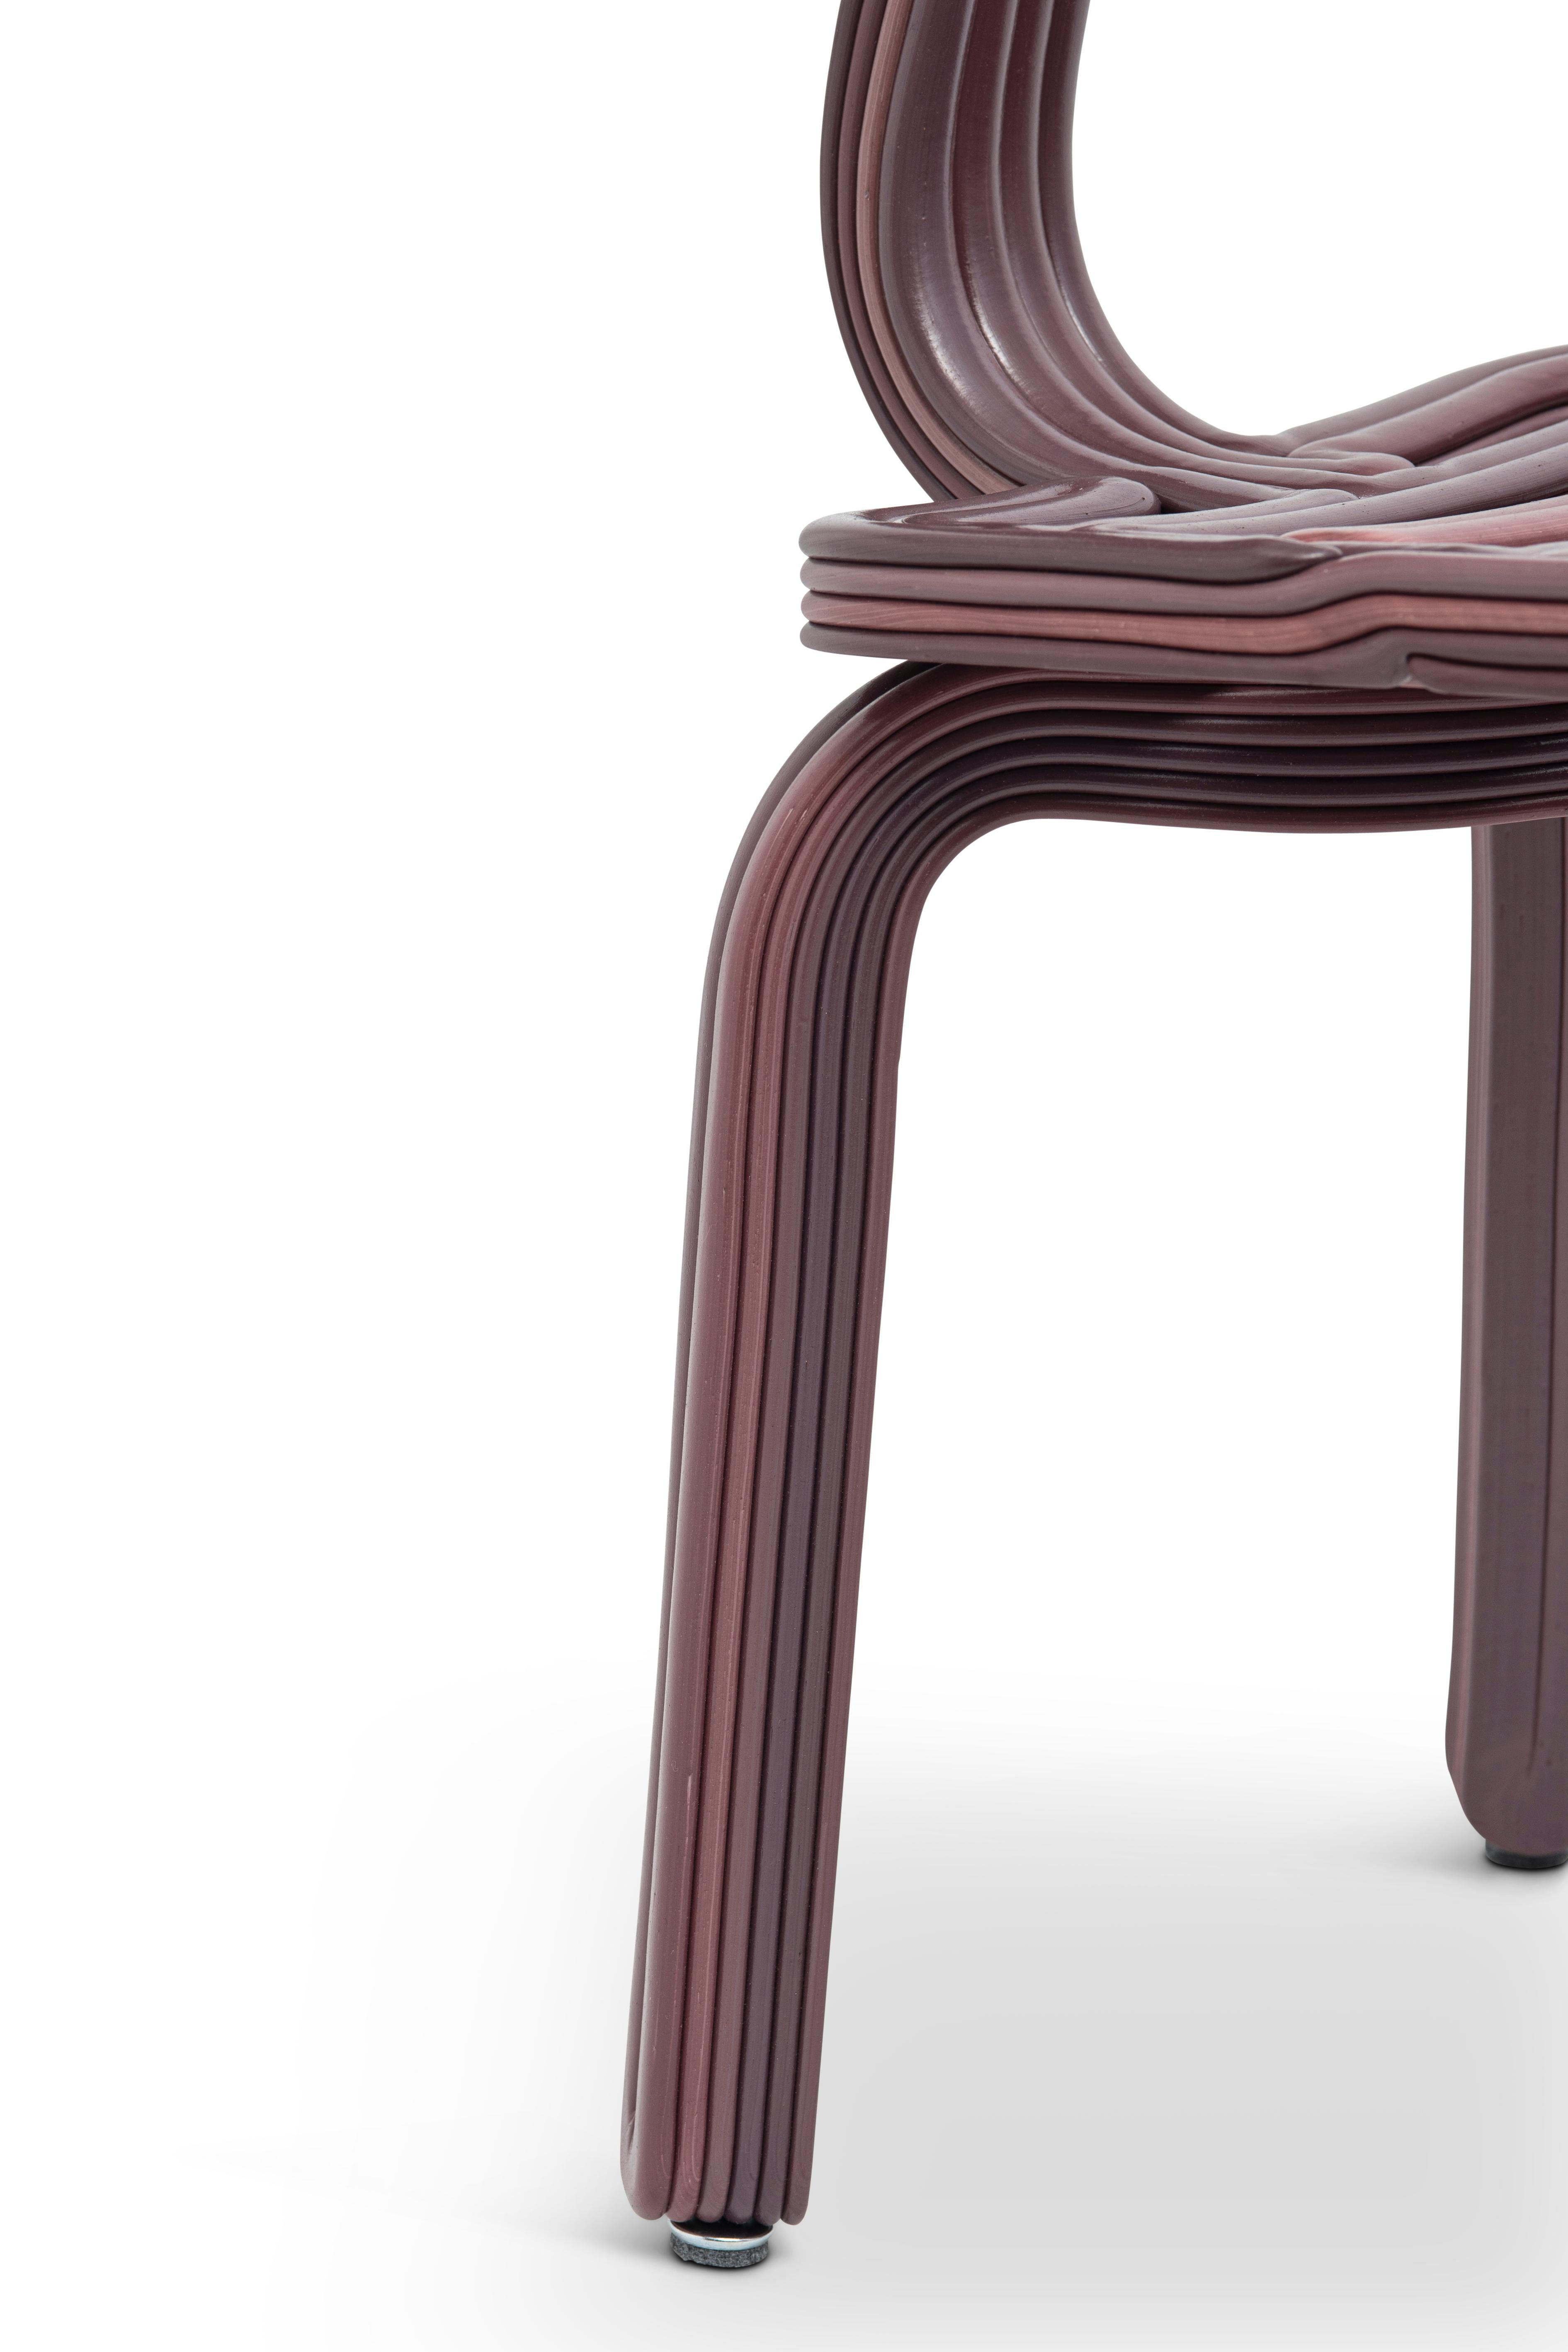 Modern Chubby Chair in Port 3D Printed Recycled Plastic